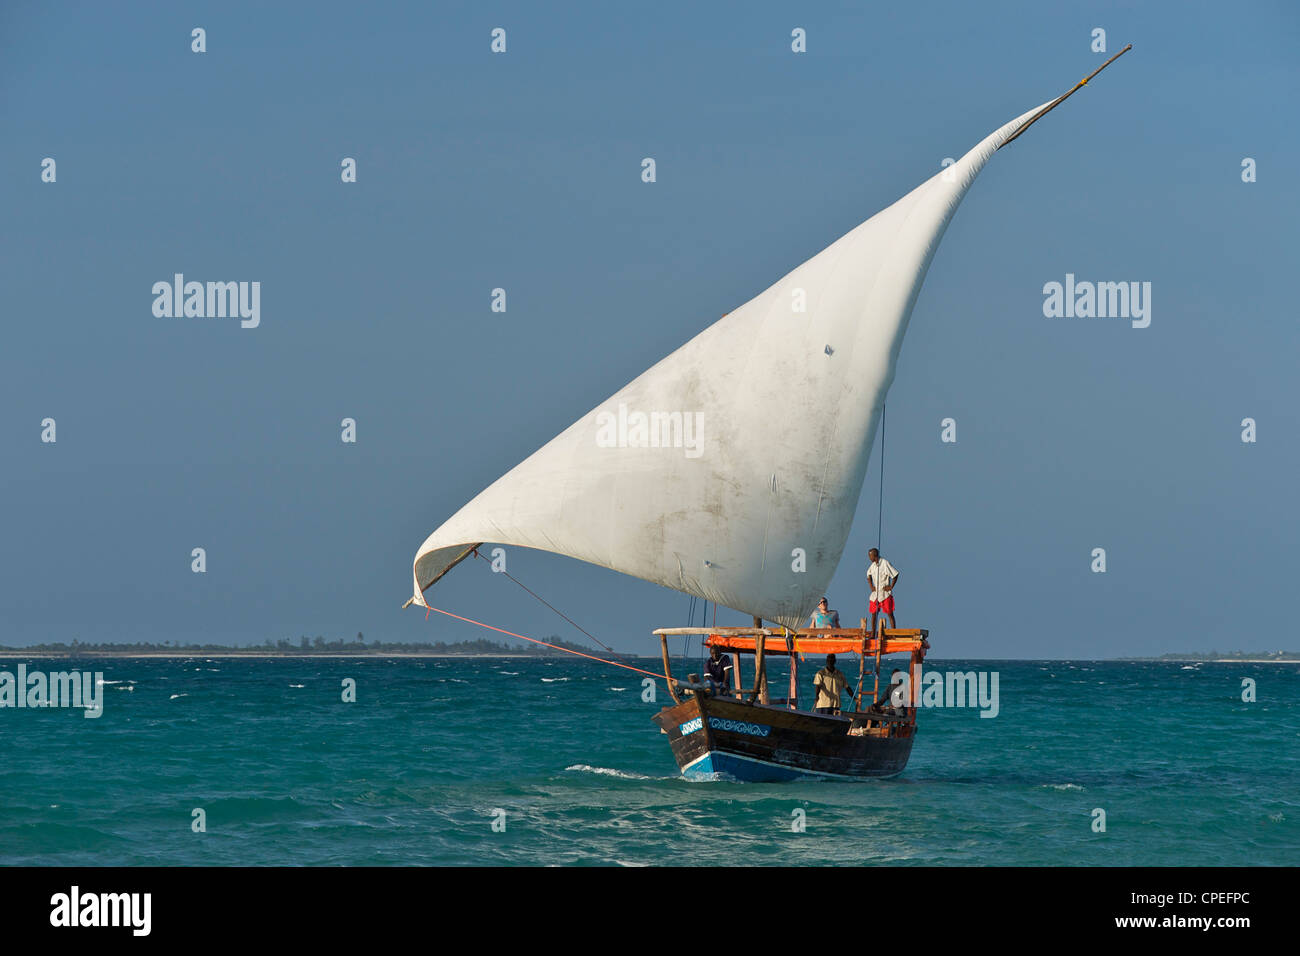 Dhow sailing in the Quirimbas archipelago off the coast of northern Mozambique. Stock Photo